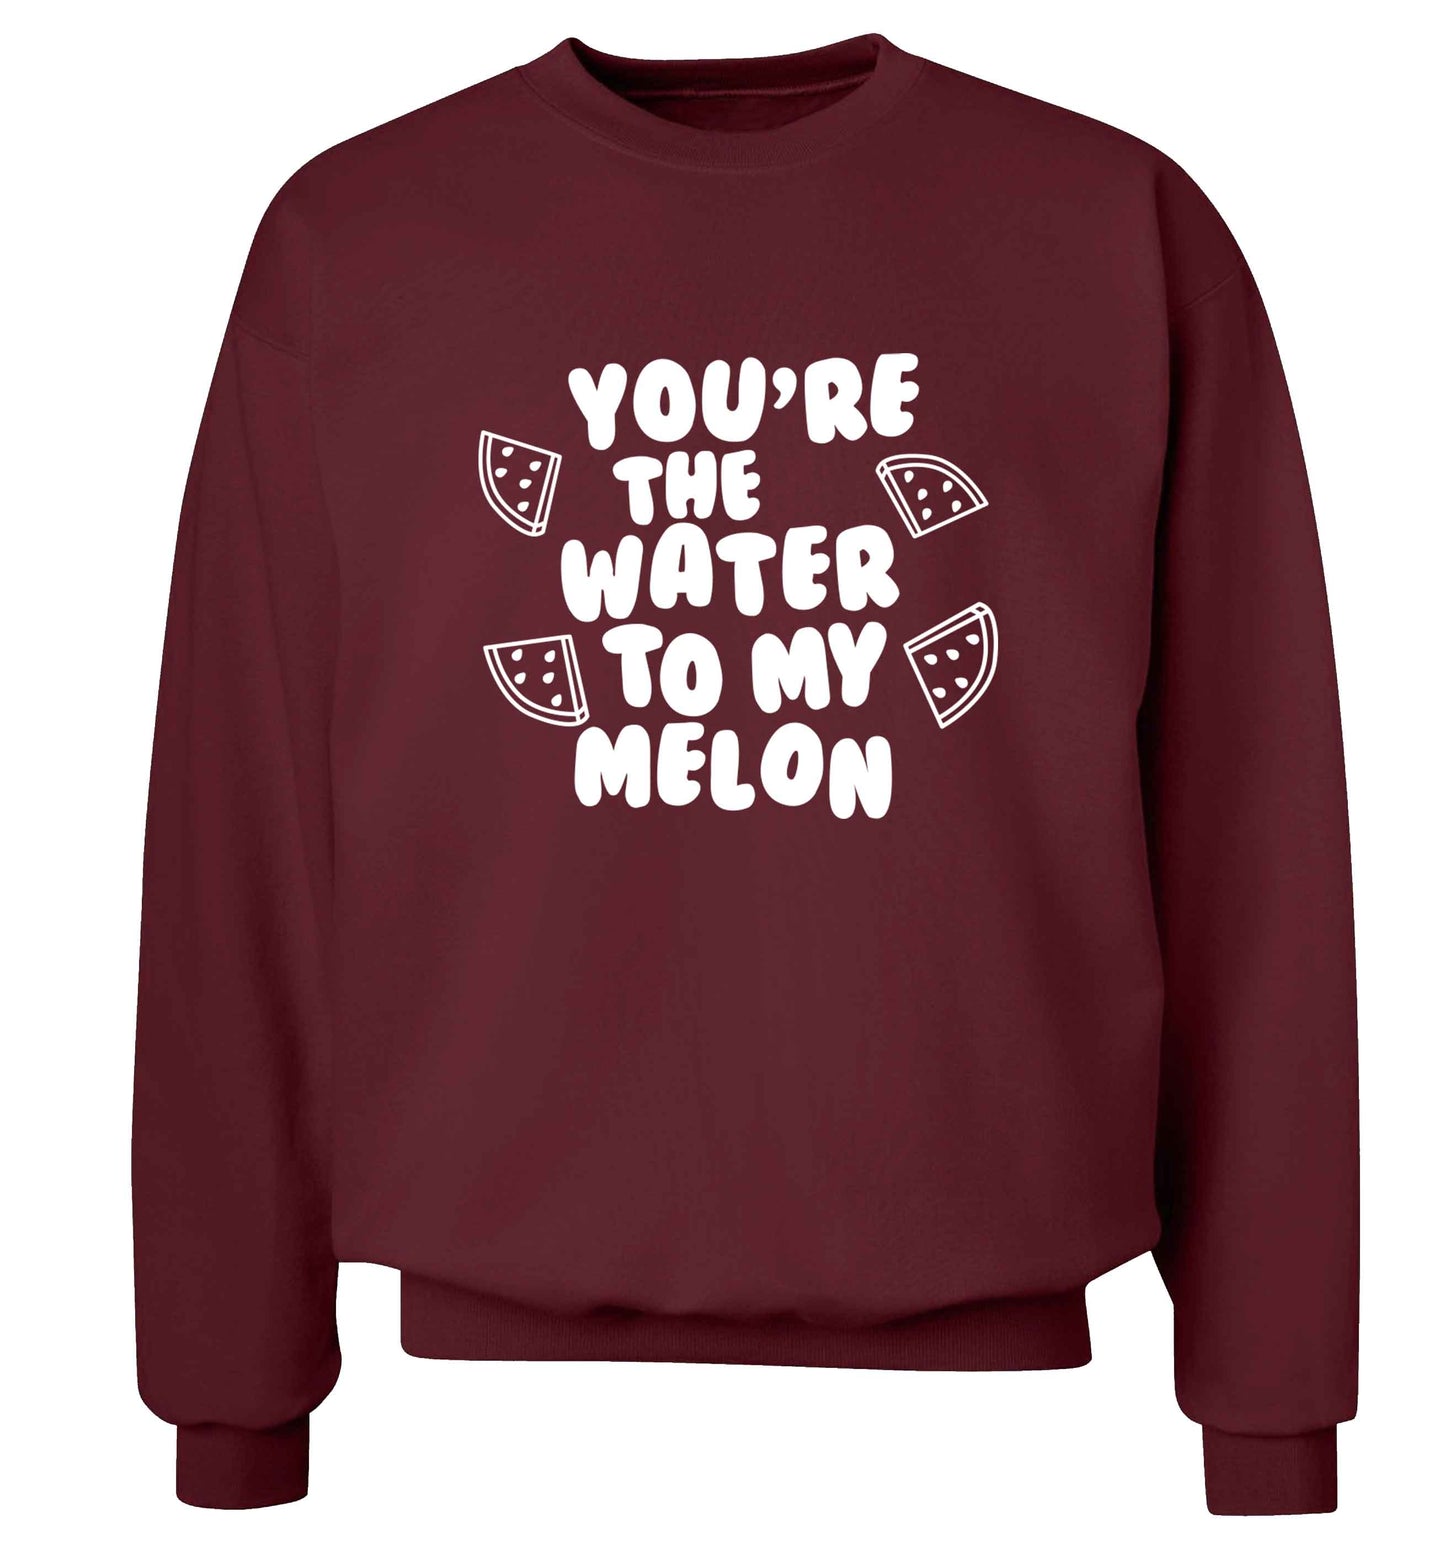 You're the water to my melon adult's unisex maroon sweater 2XL